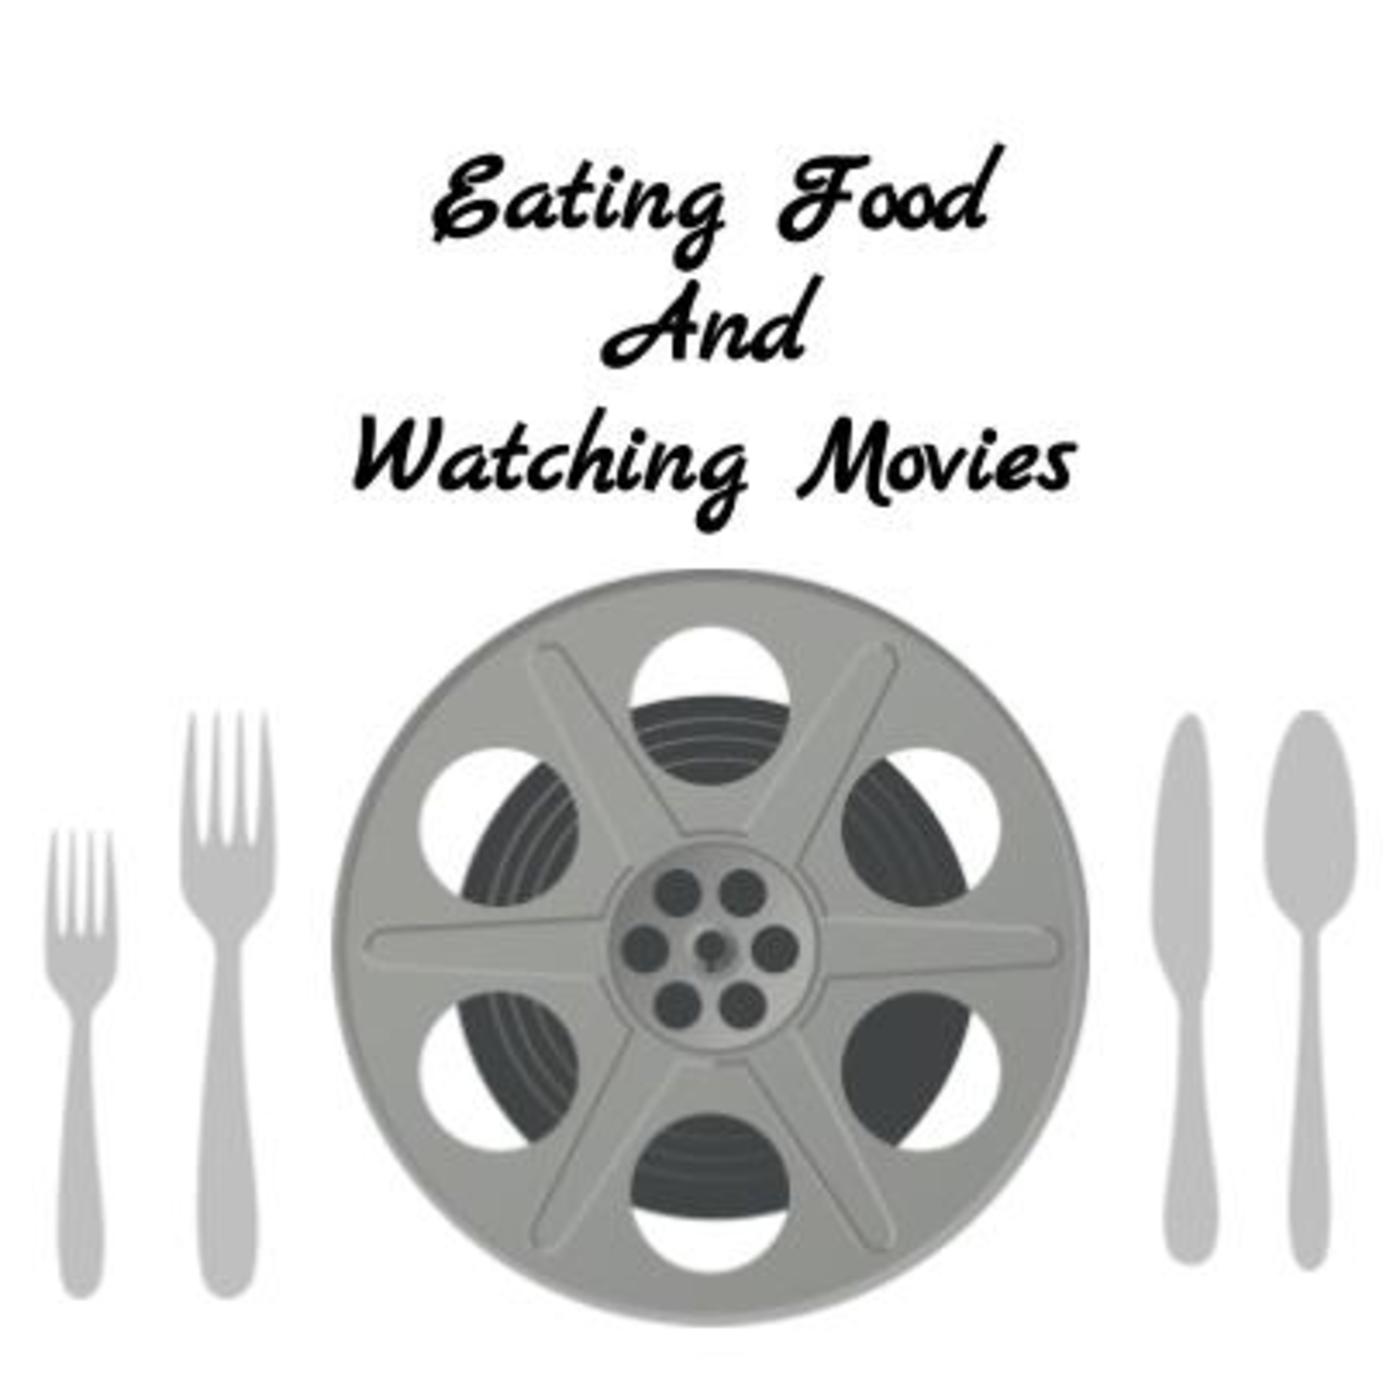 Eating Food and Watching Movies